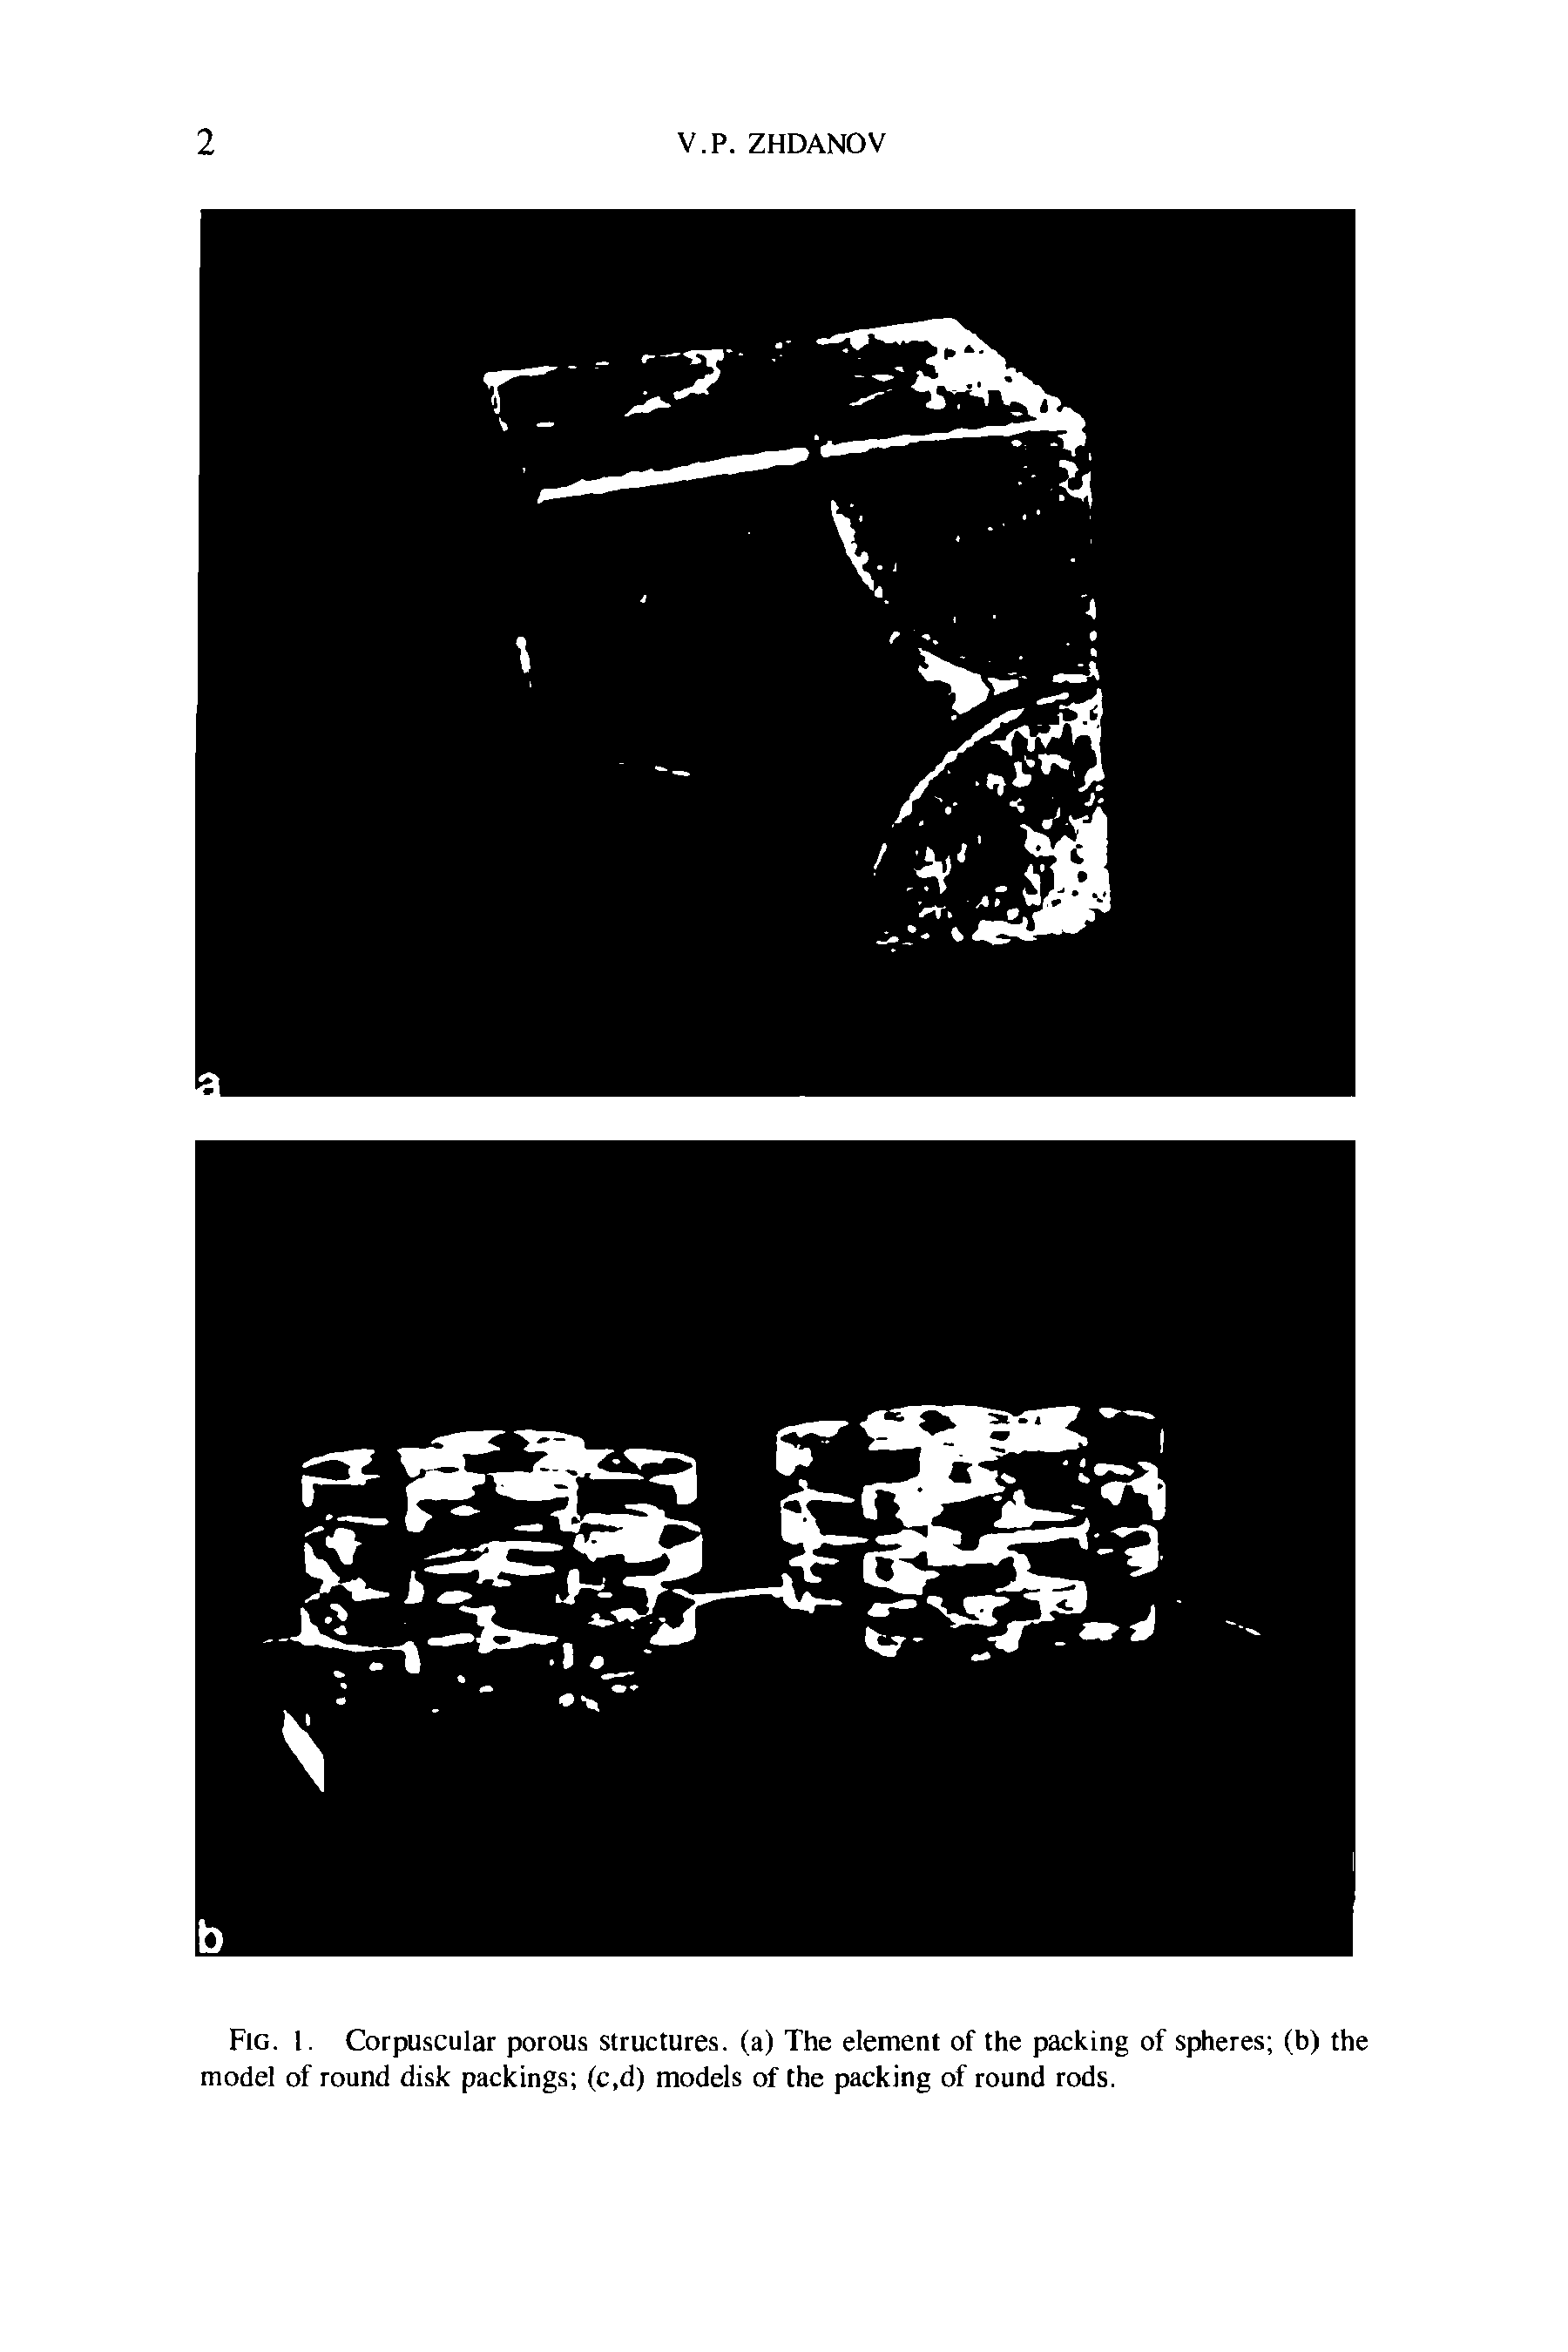 Fig. 1. Corpuscular porous structures, (a) The element of the packing of spheres (b) the model of round disk packings (c,d) models of the packing of round rods.